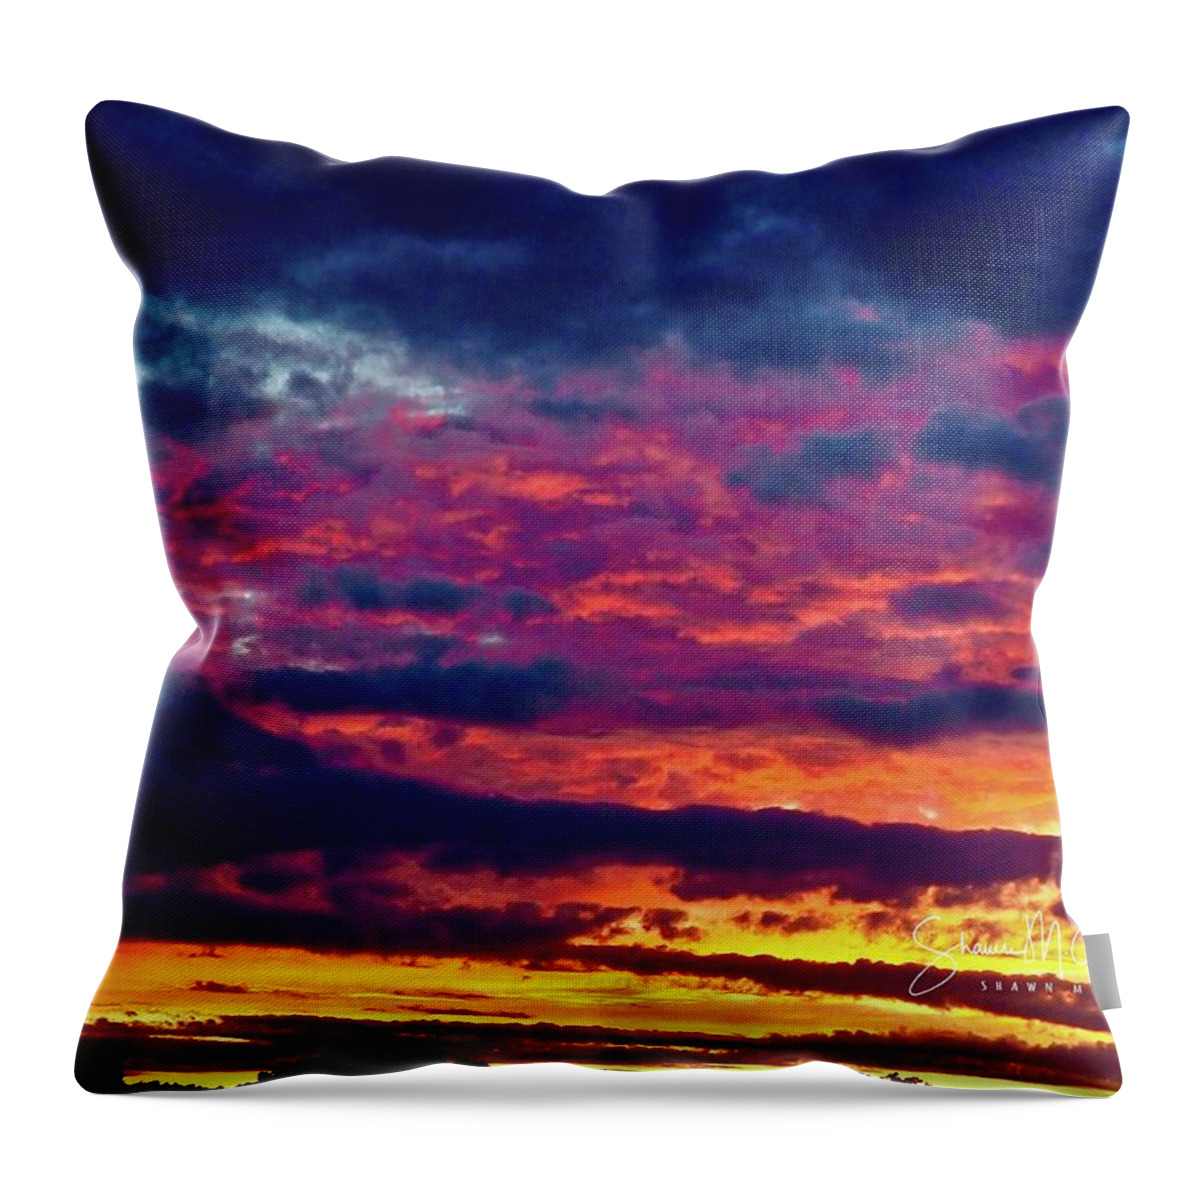 Sky Throw Pillow featuring the photograph The Blessing Blaze Above by Shawn M Greener